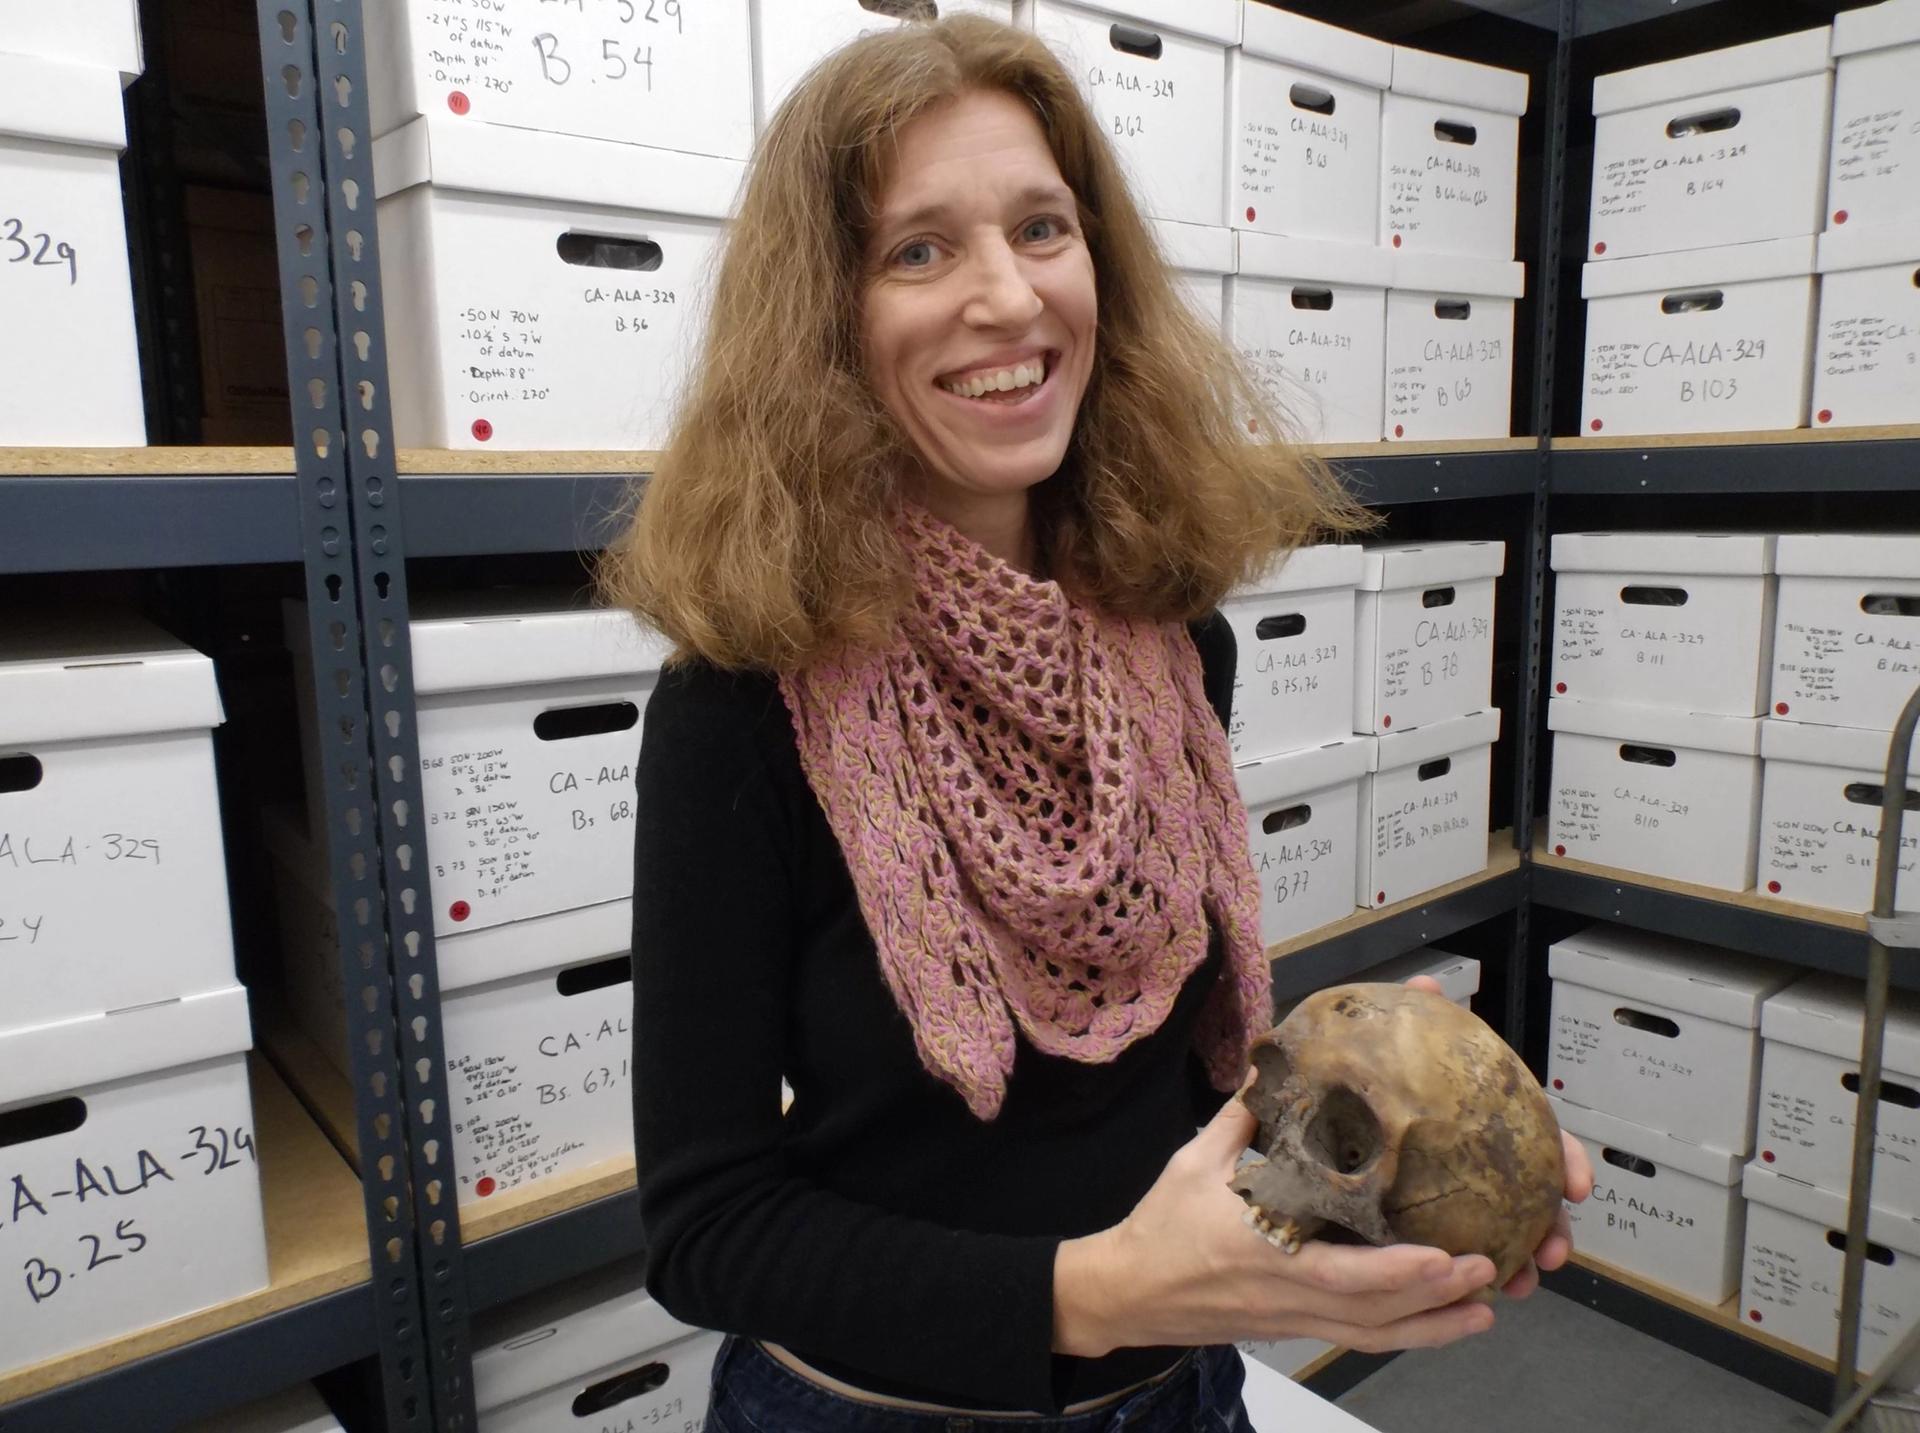 Anthropologist Elizabeth Weiss posing with a human skull in the collection of the San José State University in a Twitter post published on 18 September 2021, which was captioned “so happy to be back with some old friends”. Photo: Elizabeth Weiss/@eweissunburied.